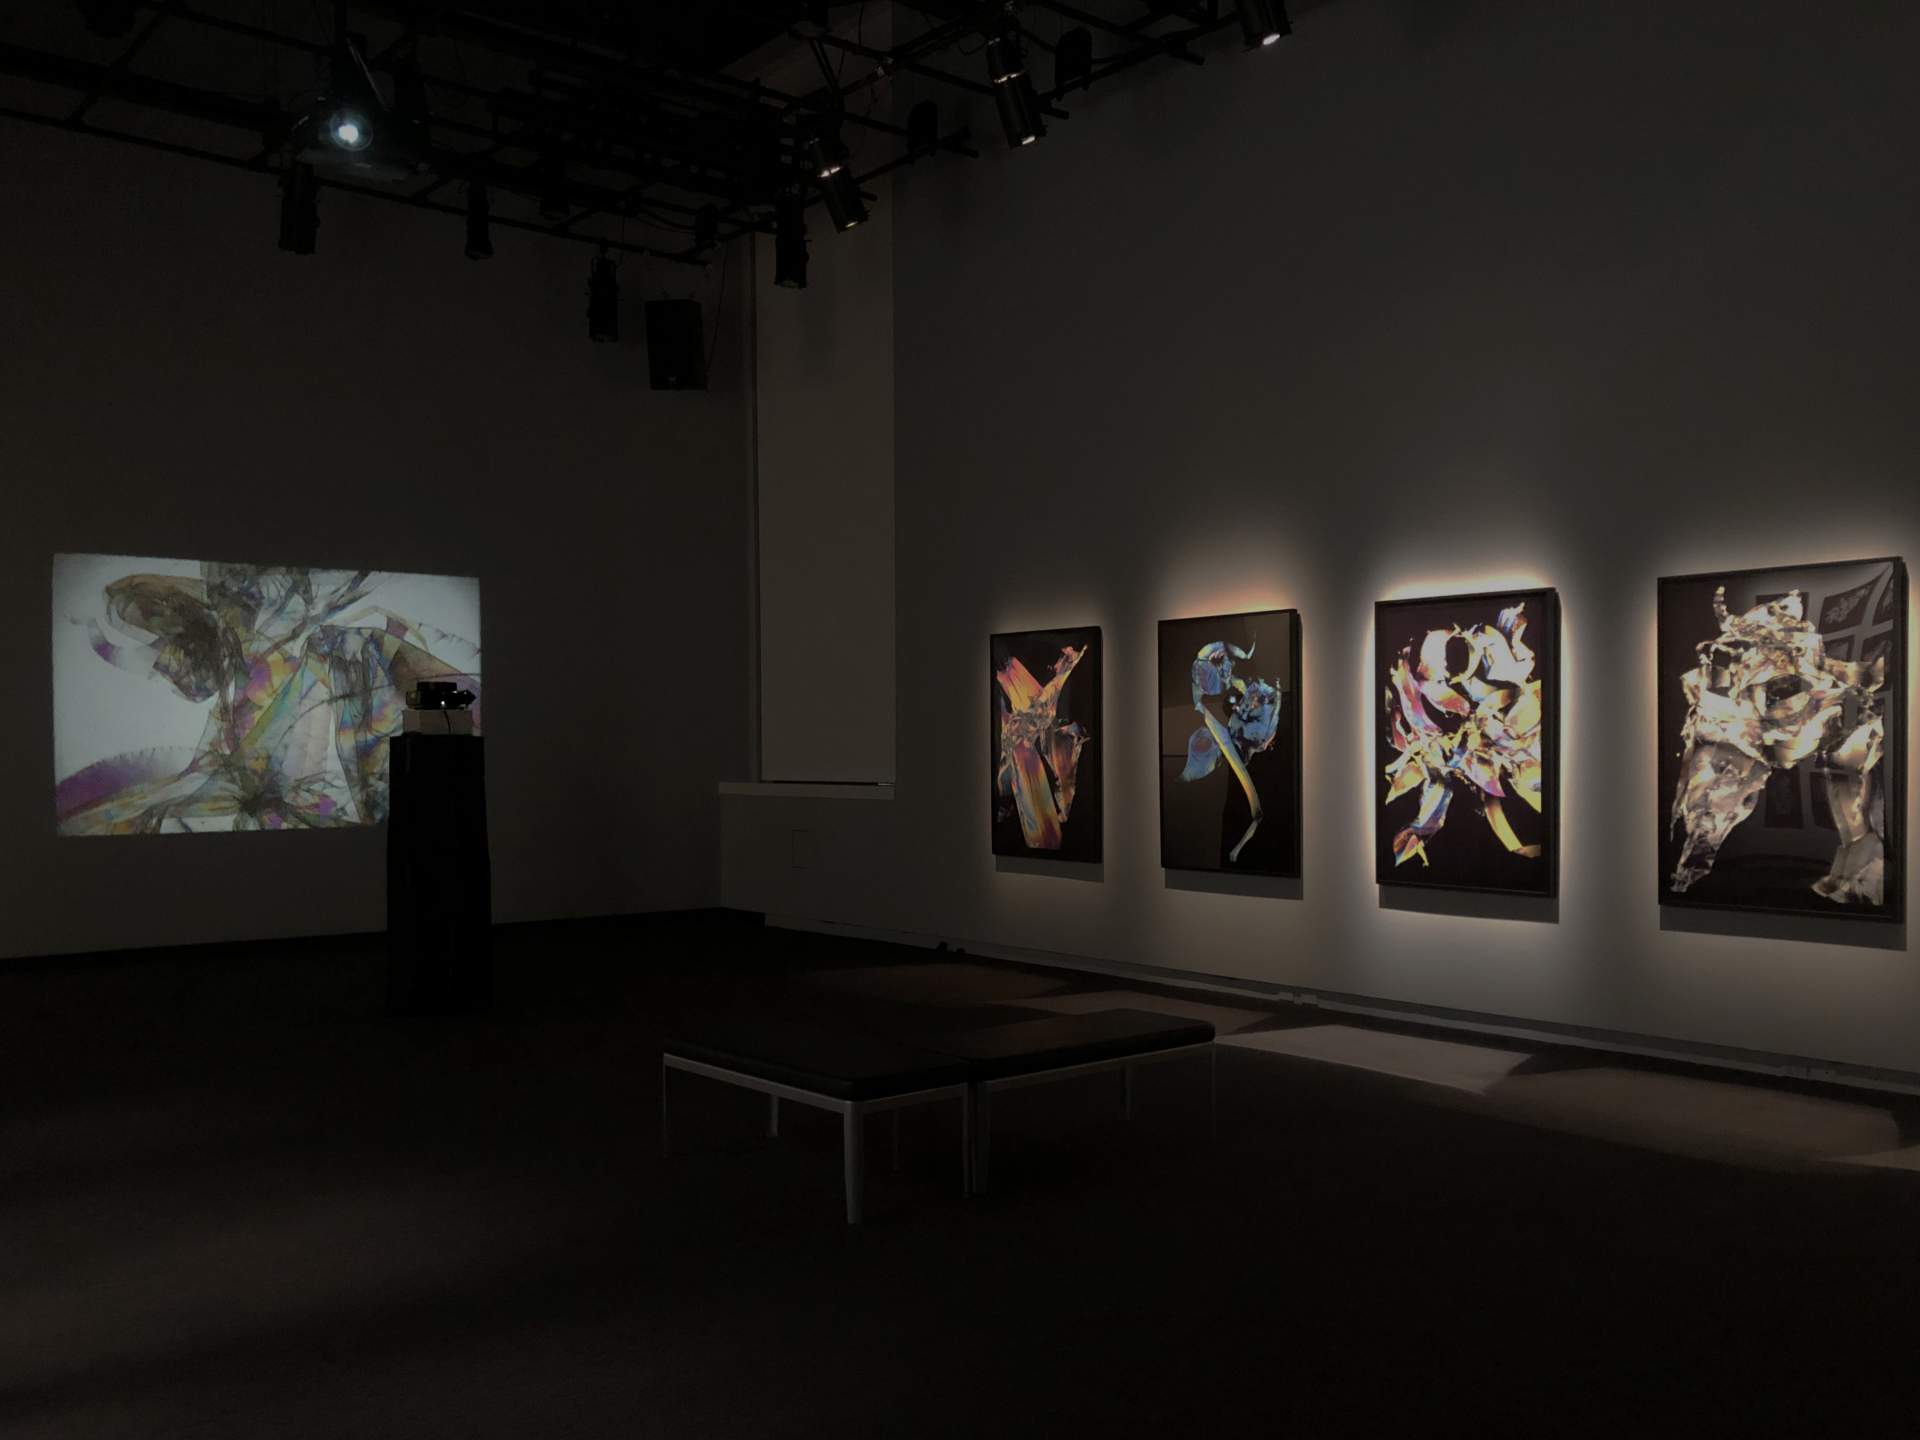 [Photograph of the exhibition "Victor Shanchuk, Chemical Light"]